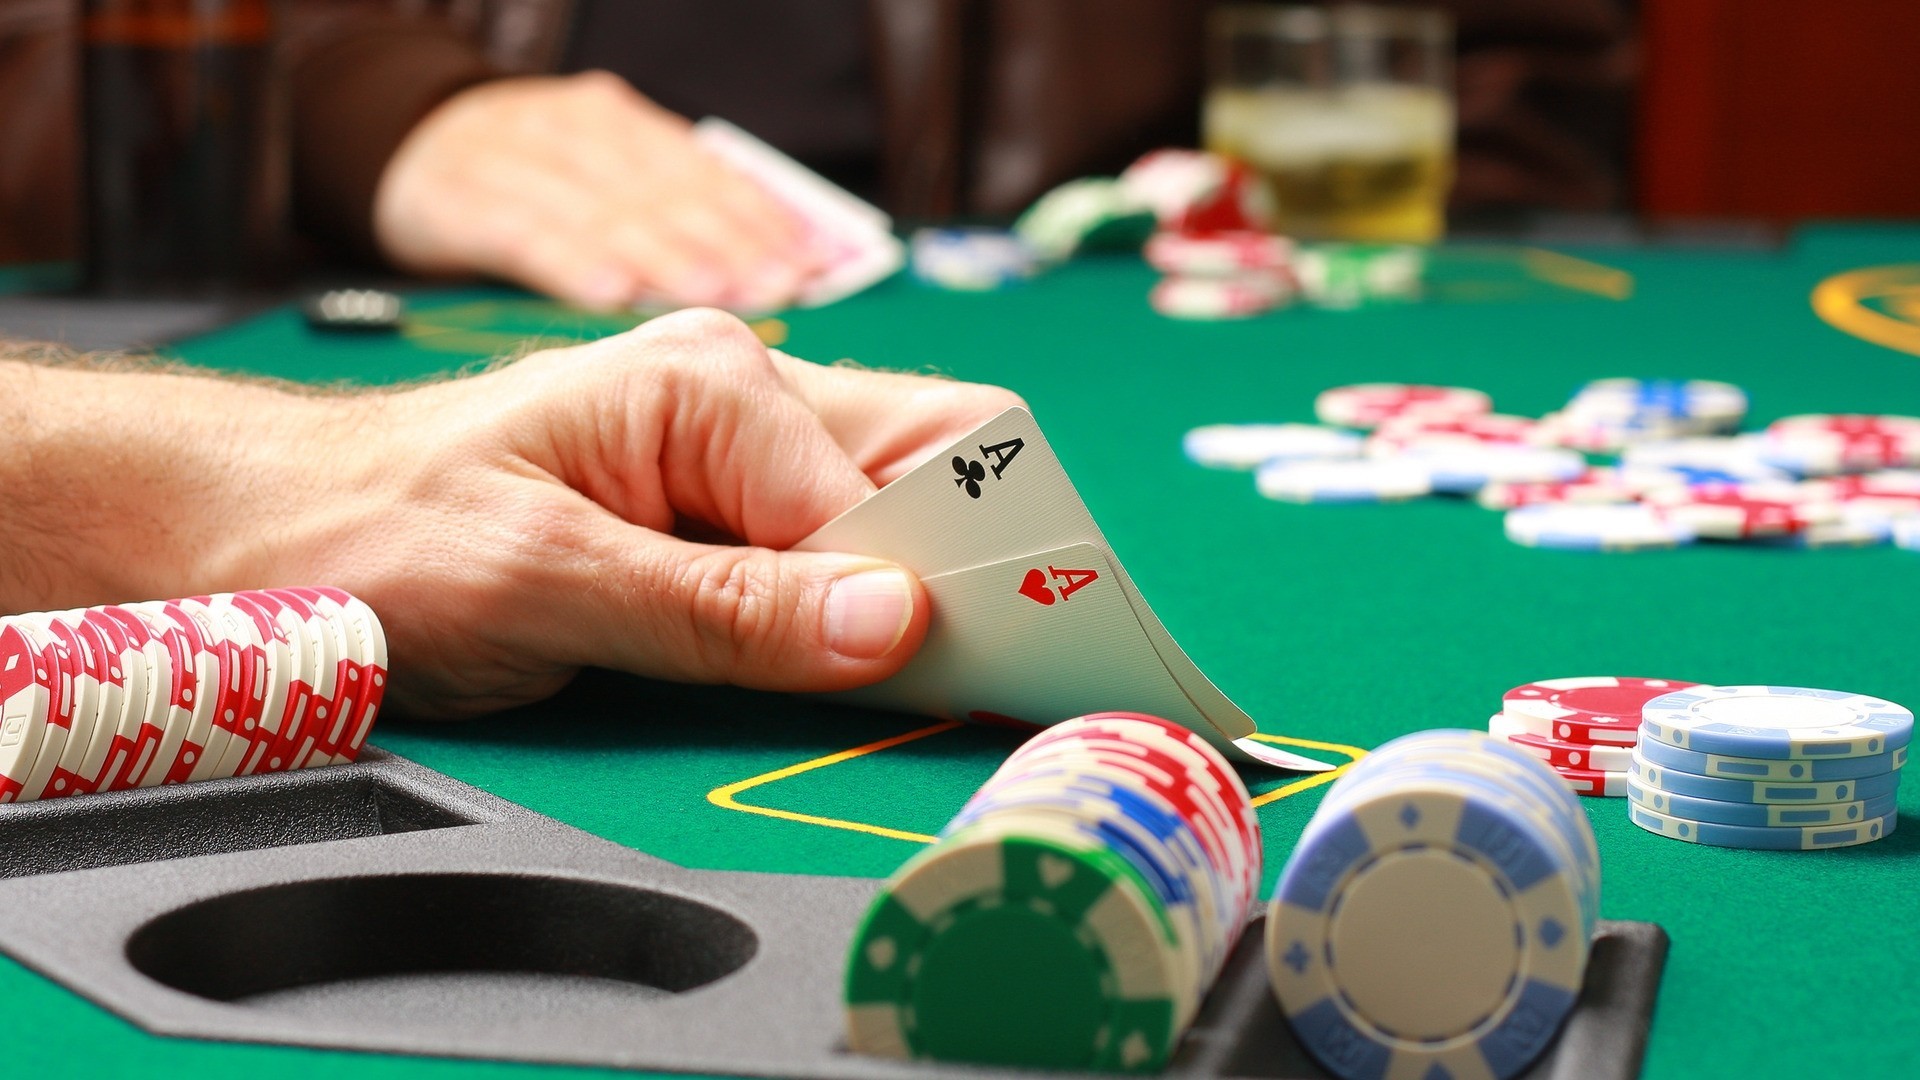 What You Don't Know About Online Casino May Shock You